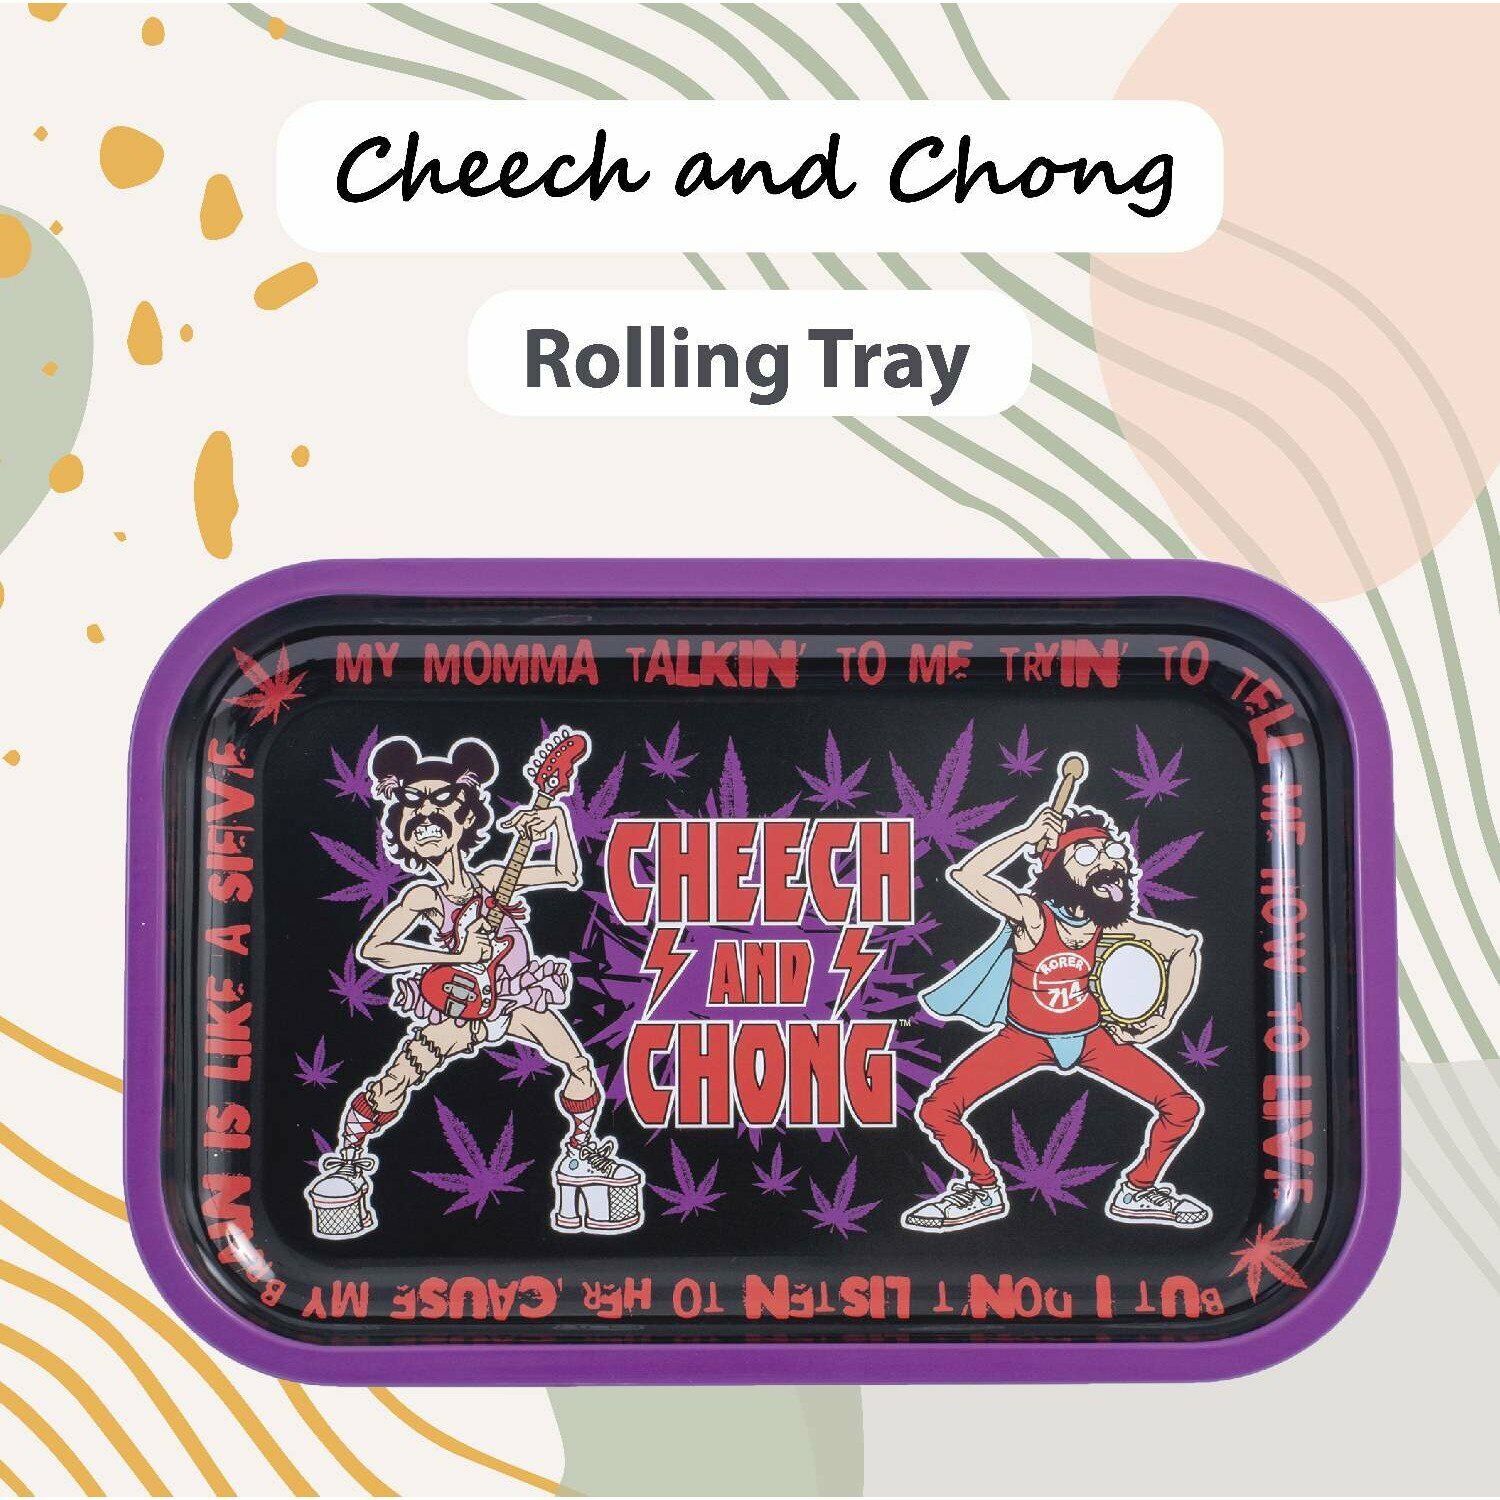 Cheech and Chong Officially Licensed Premium Rolling Tray – Ear Ache 